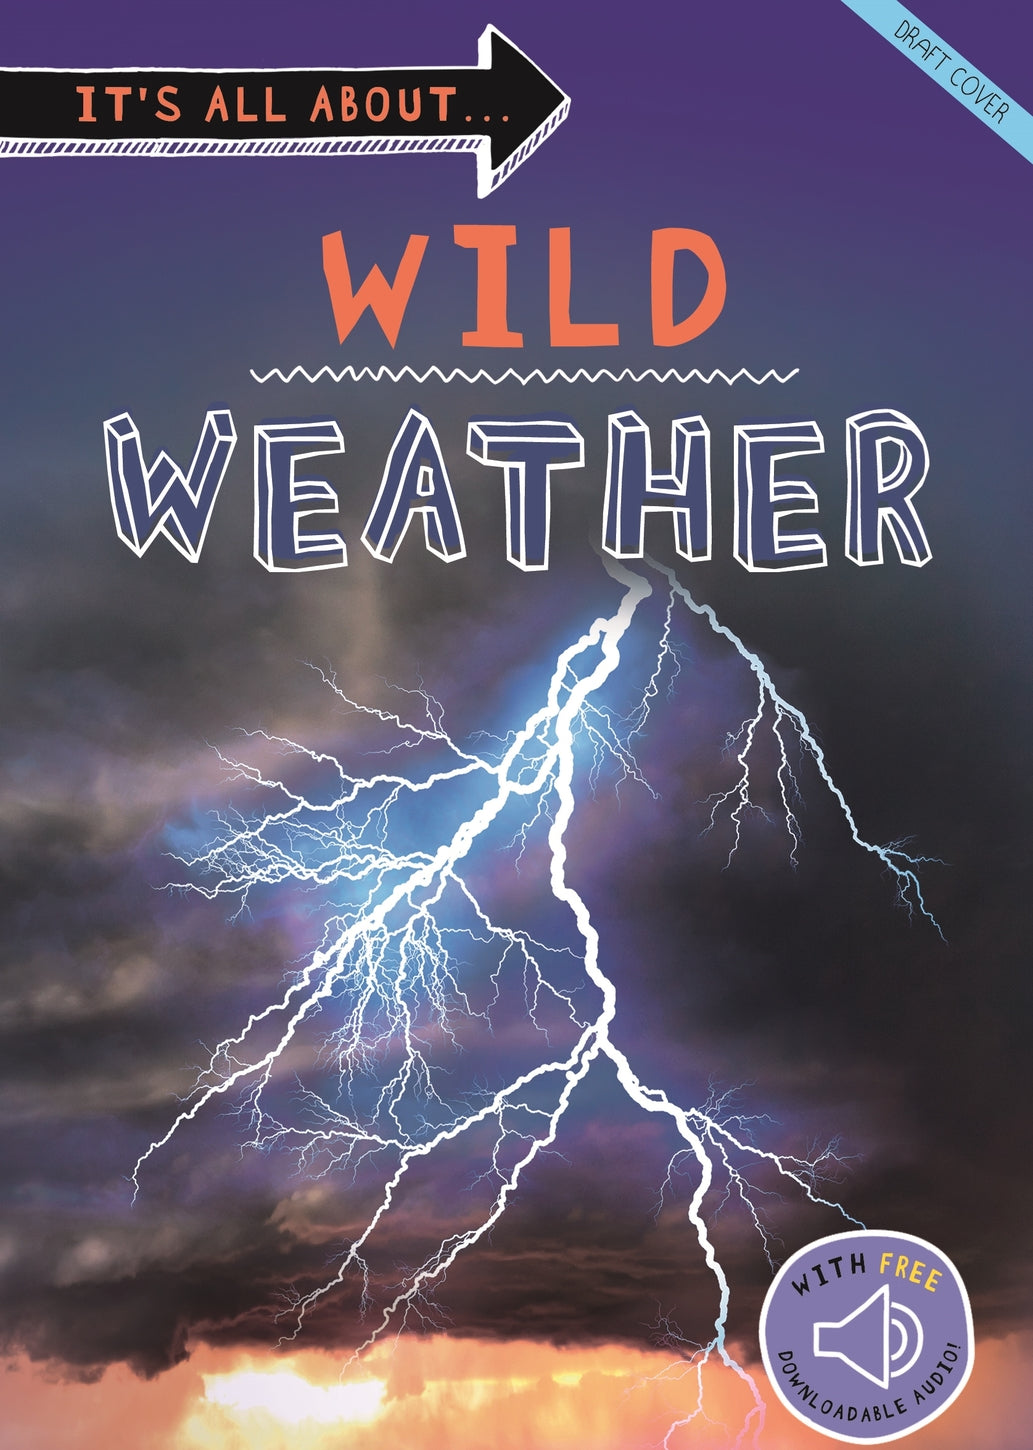 It's all about... Wild Weather: Everything you want to know about our weather in one amazing book